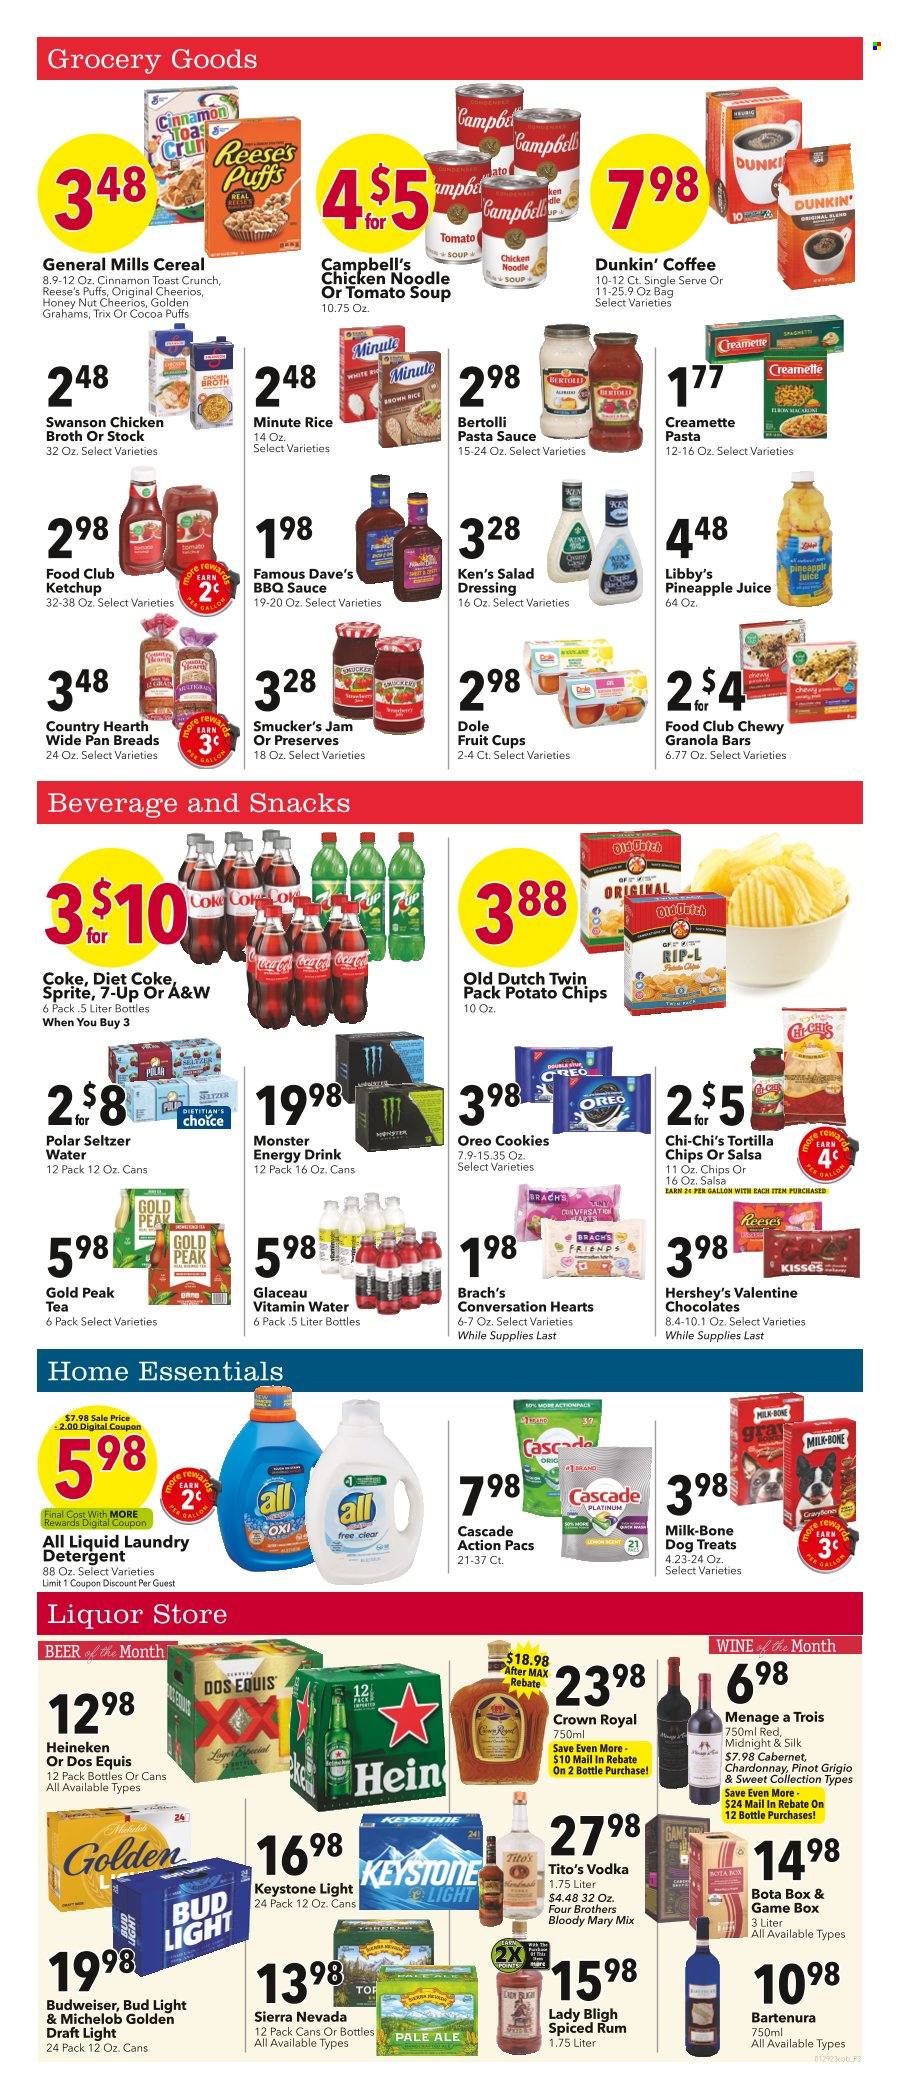 thumbnail - Coborn's Flyer - 01/29/2023 - 02/04/2023 - Sales products - puffs, Dole, pineapple, fruit cup, Campbell's, tomato soup, pasta sauce, soup, sauce, noodles, Four Brothers, Bertolli, Oreo, milk, Silk, Reese's, Hershey's, cookies, chocolate, tortilla chips, potato chips, chips, chicken broth, broth, cereals, Cheerios, granola bar, Trix, rice, Creamette, BBQ sauce, salad dressing, ketchup, dressing, salsa, fruit jam, Coca-Cola, Sprite, pineapple juice, juice, energy drink, Monster, Diet Coke, 7UP, Monster Energy, A&W, Gold Peak Tea, seltzer water, vitamin water, tea, coffee, Cabernet Sauvignon, white wine, Chardonnay, Pinot Grigio, rum, spiced rum, vodka, beer, Bud Light, Heineken, Keystone, detergent, Cascade, laundry detergent, pan, Budweiser, Dos Equis, Michelob. Page 3.